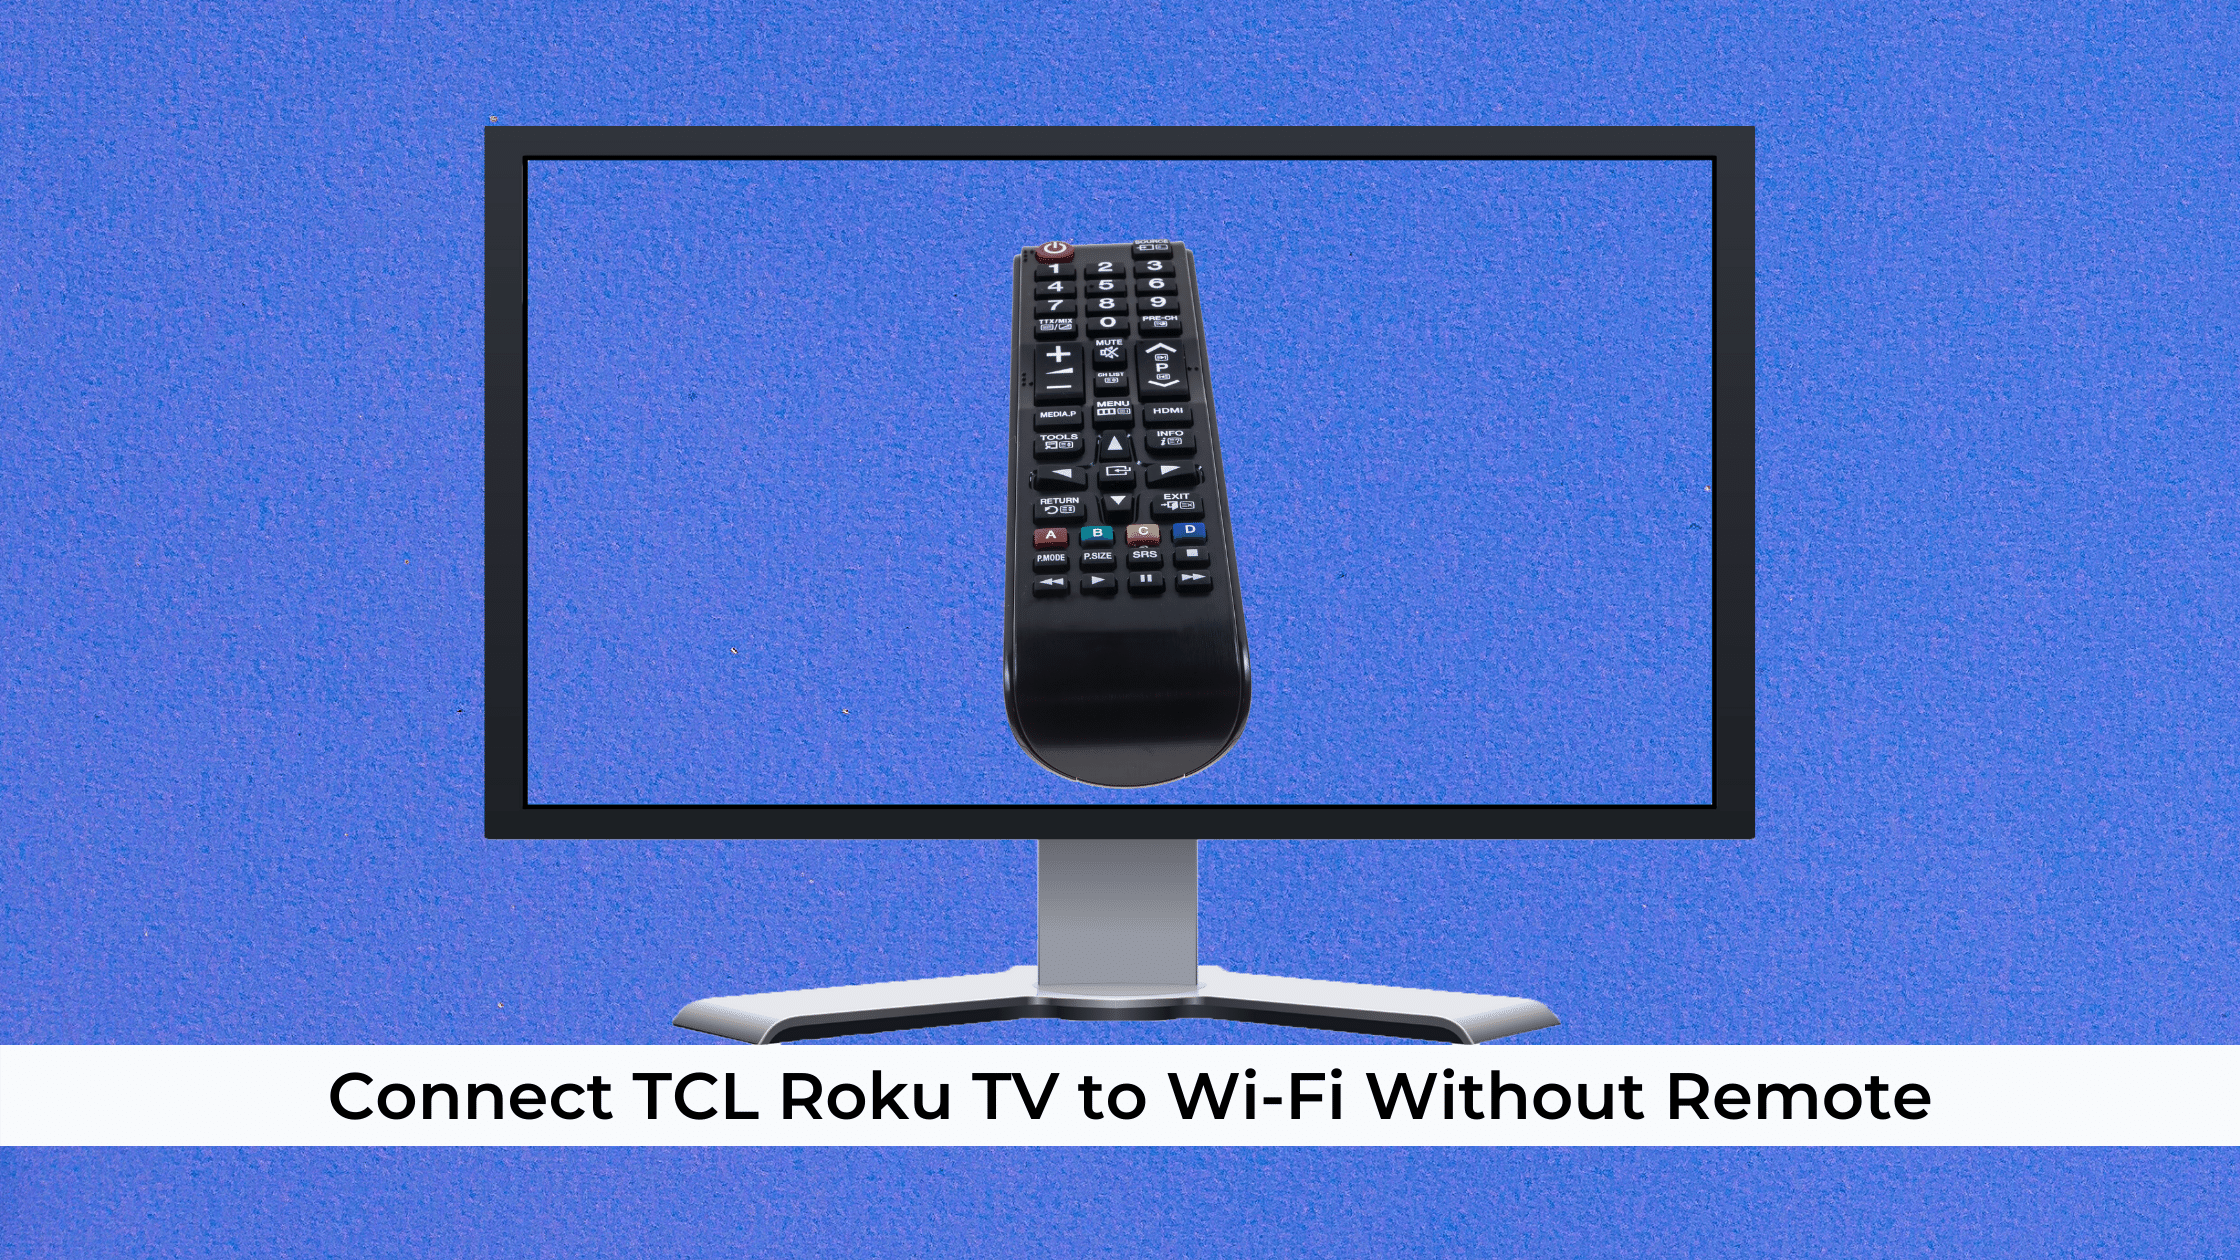 How To Connect TCL Roku TV to Wi-Fi Without Remote